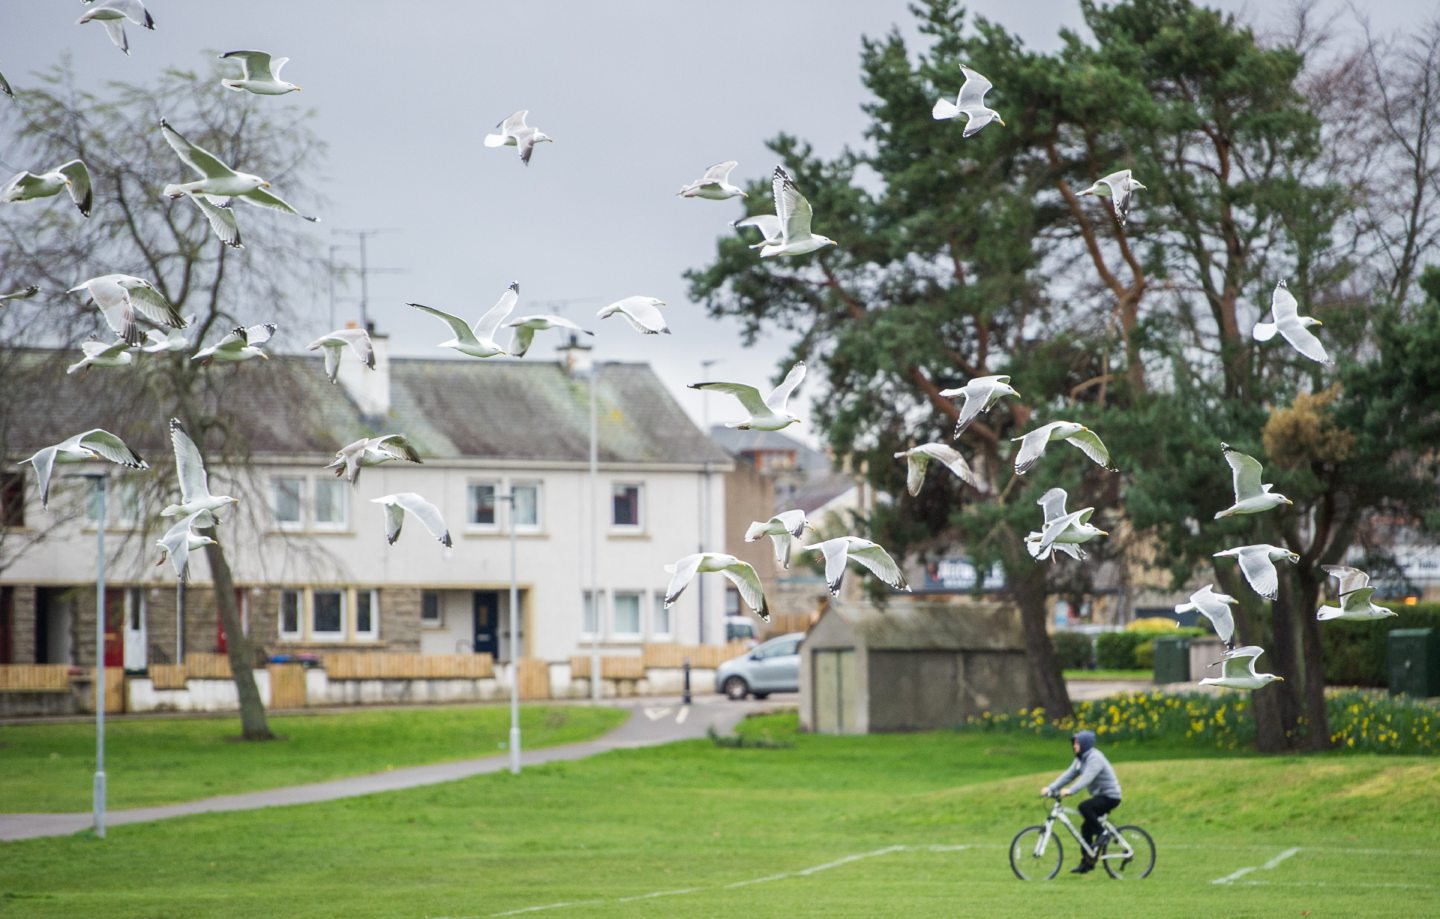 Gulls in the air above cyclist in Doocot Park in Elgin. 